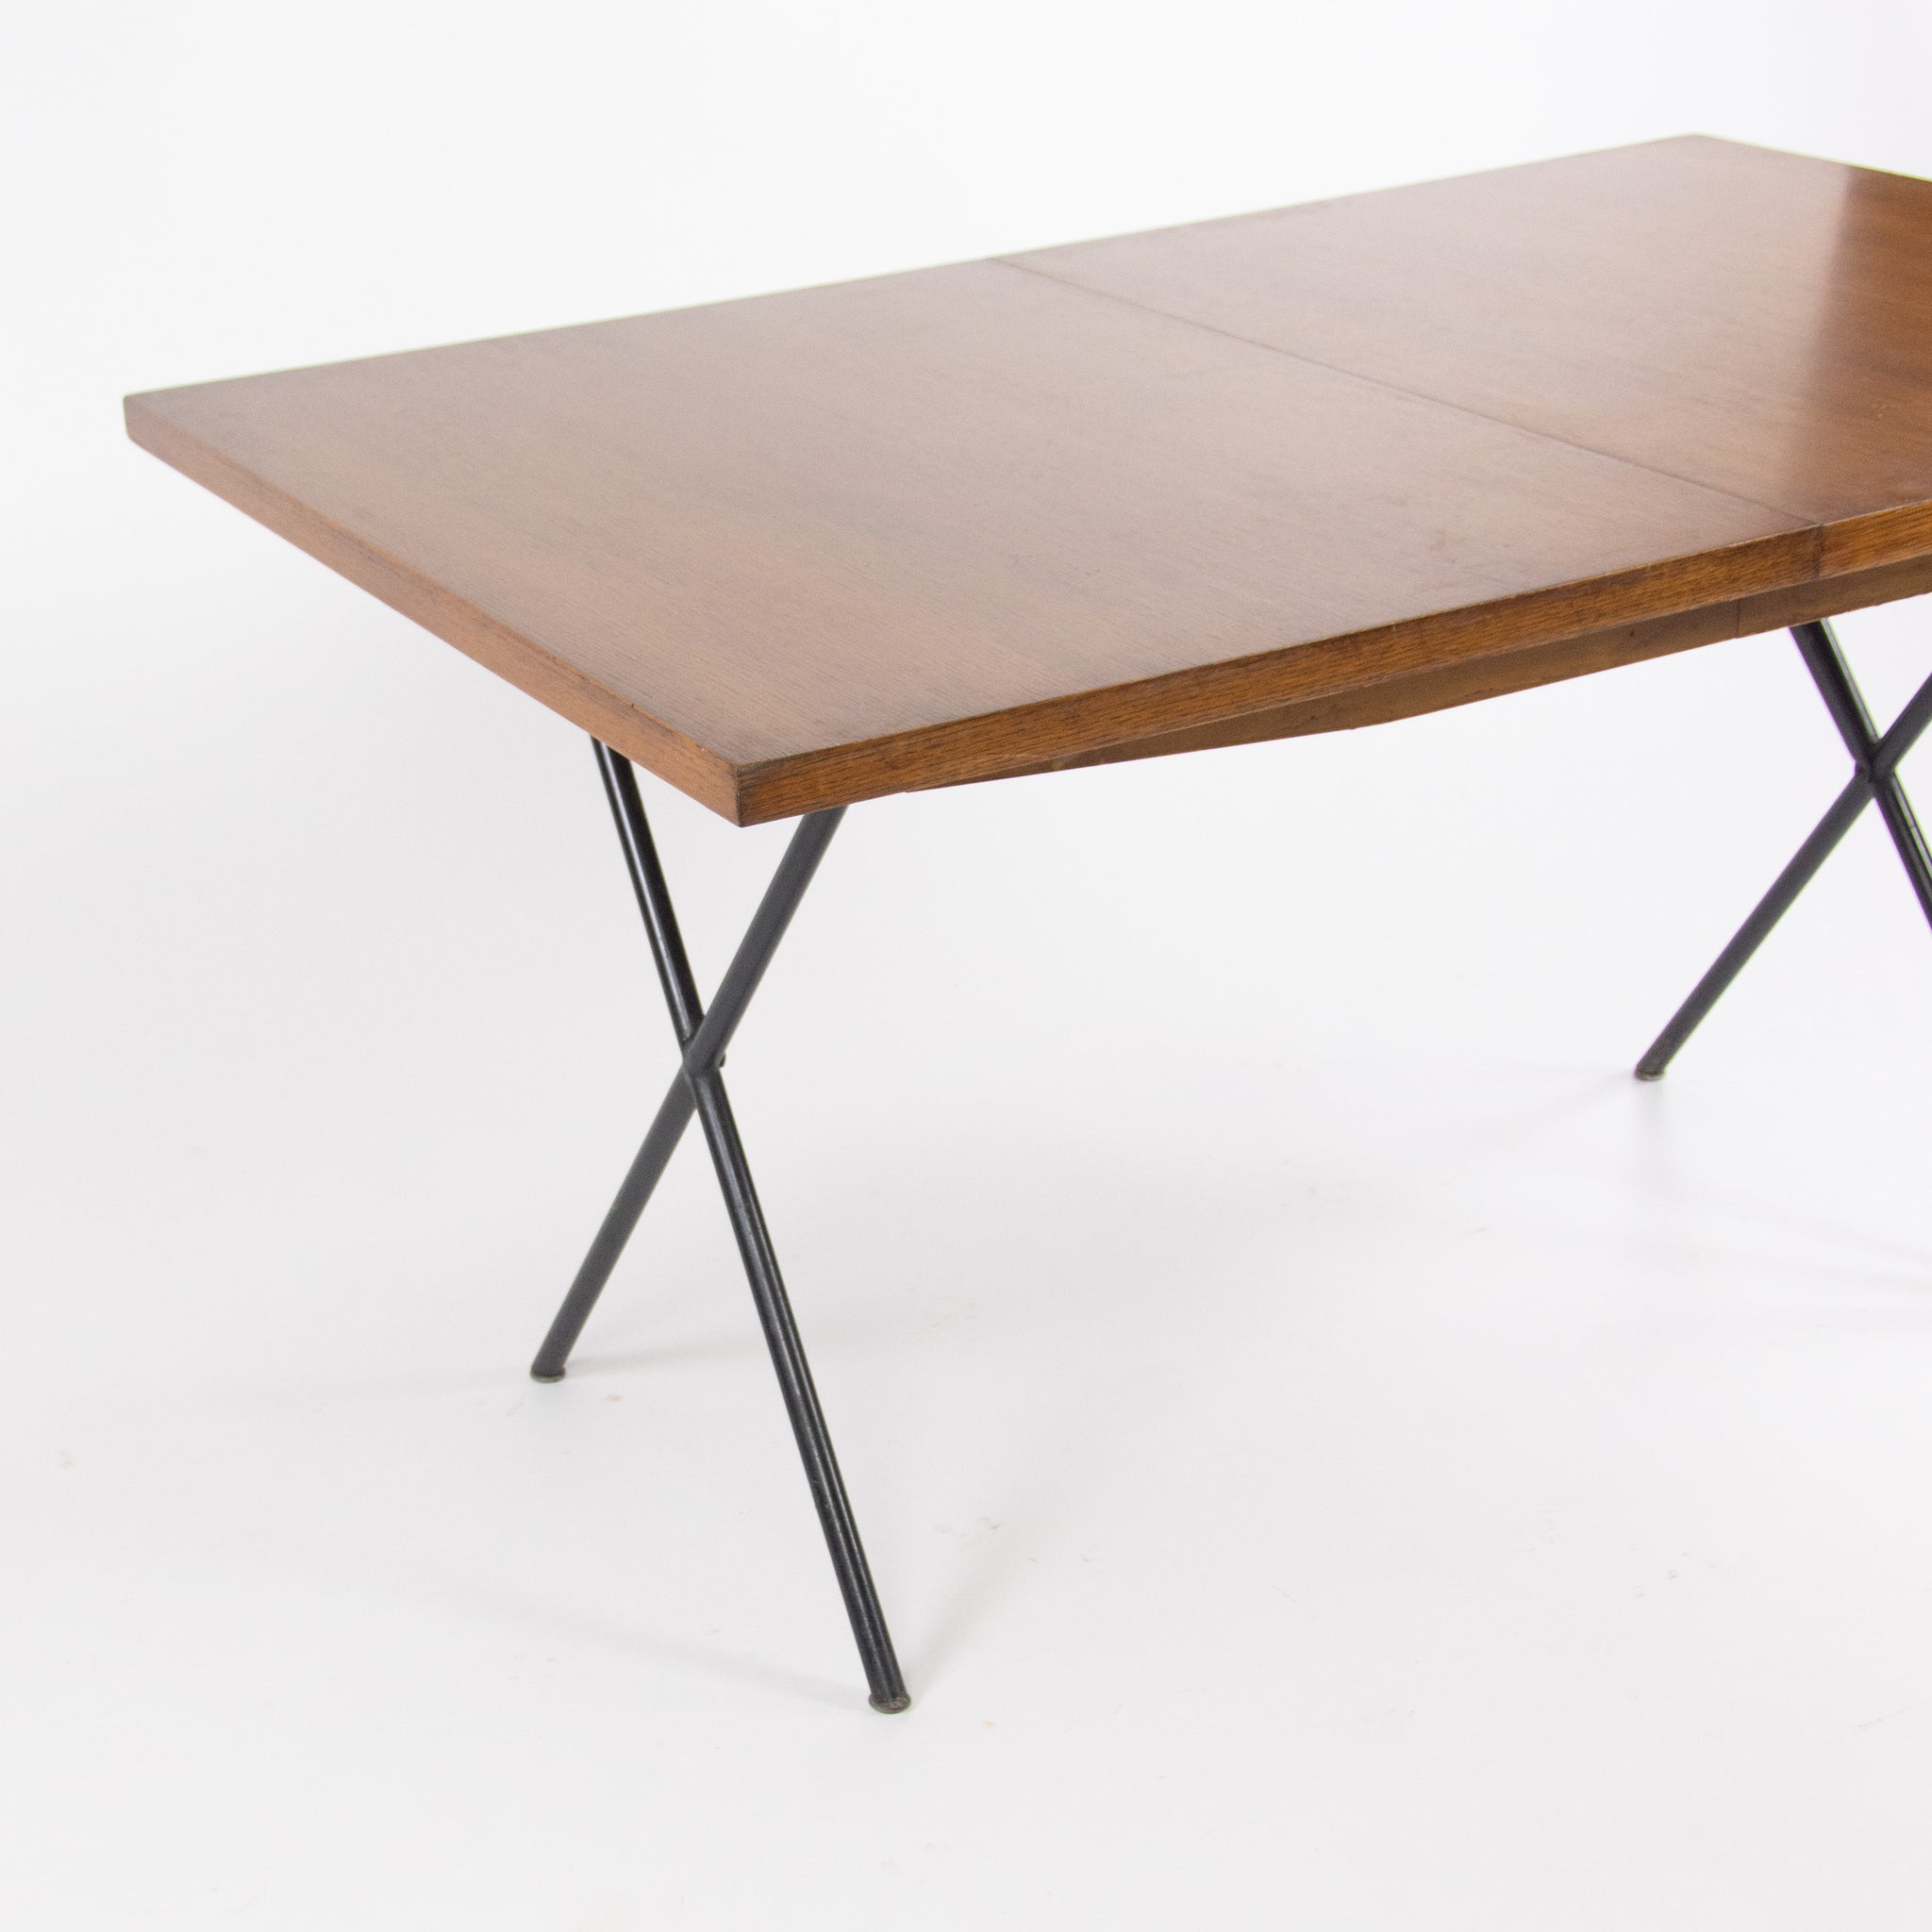 1950's Original George Nelson Herman Miller X Leg Extension Dining Table 5260